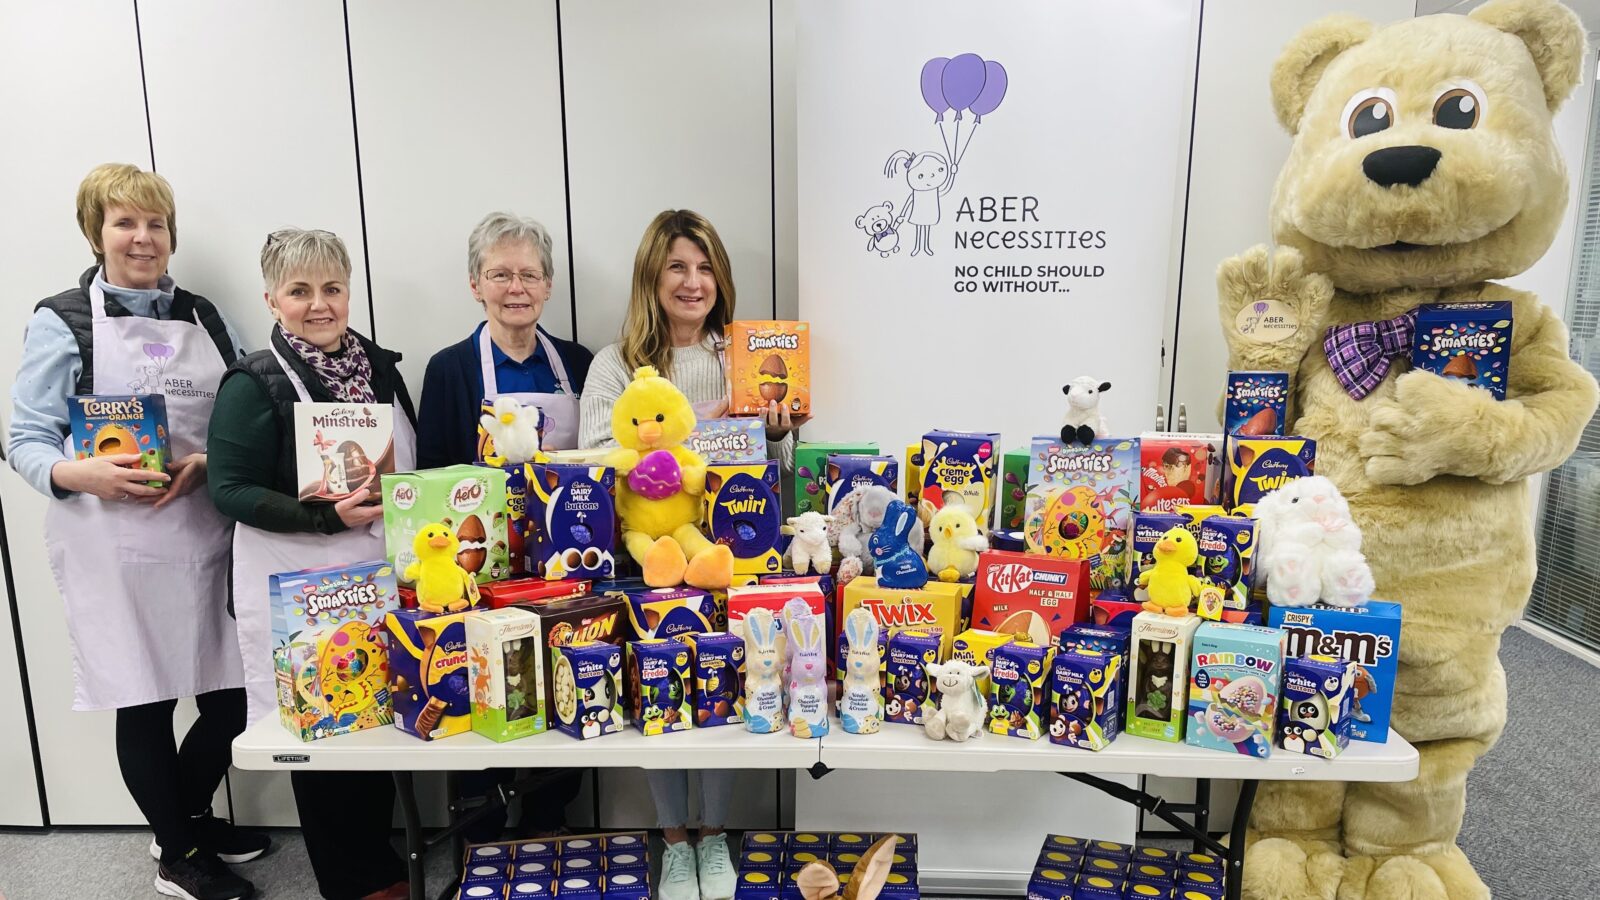 AberNecessities easter egg donations